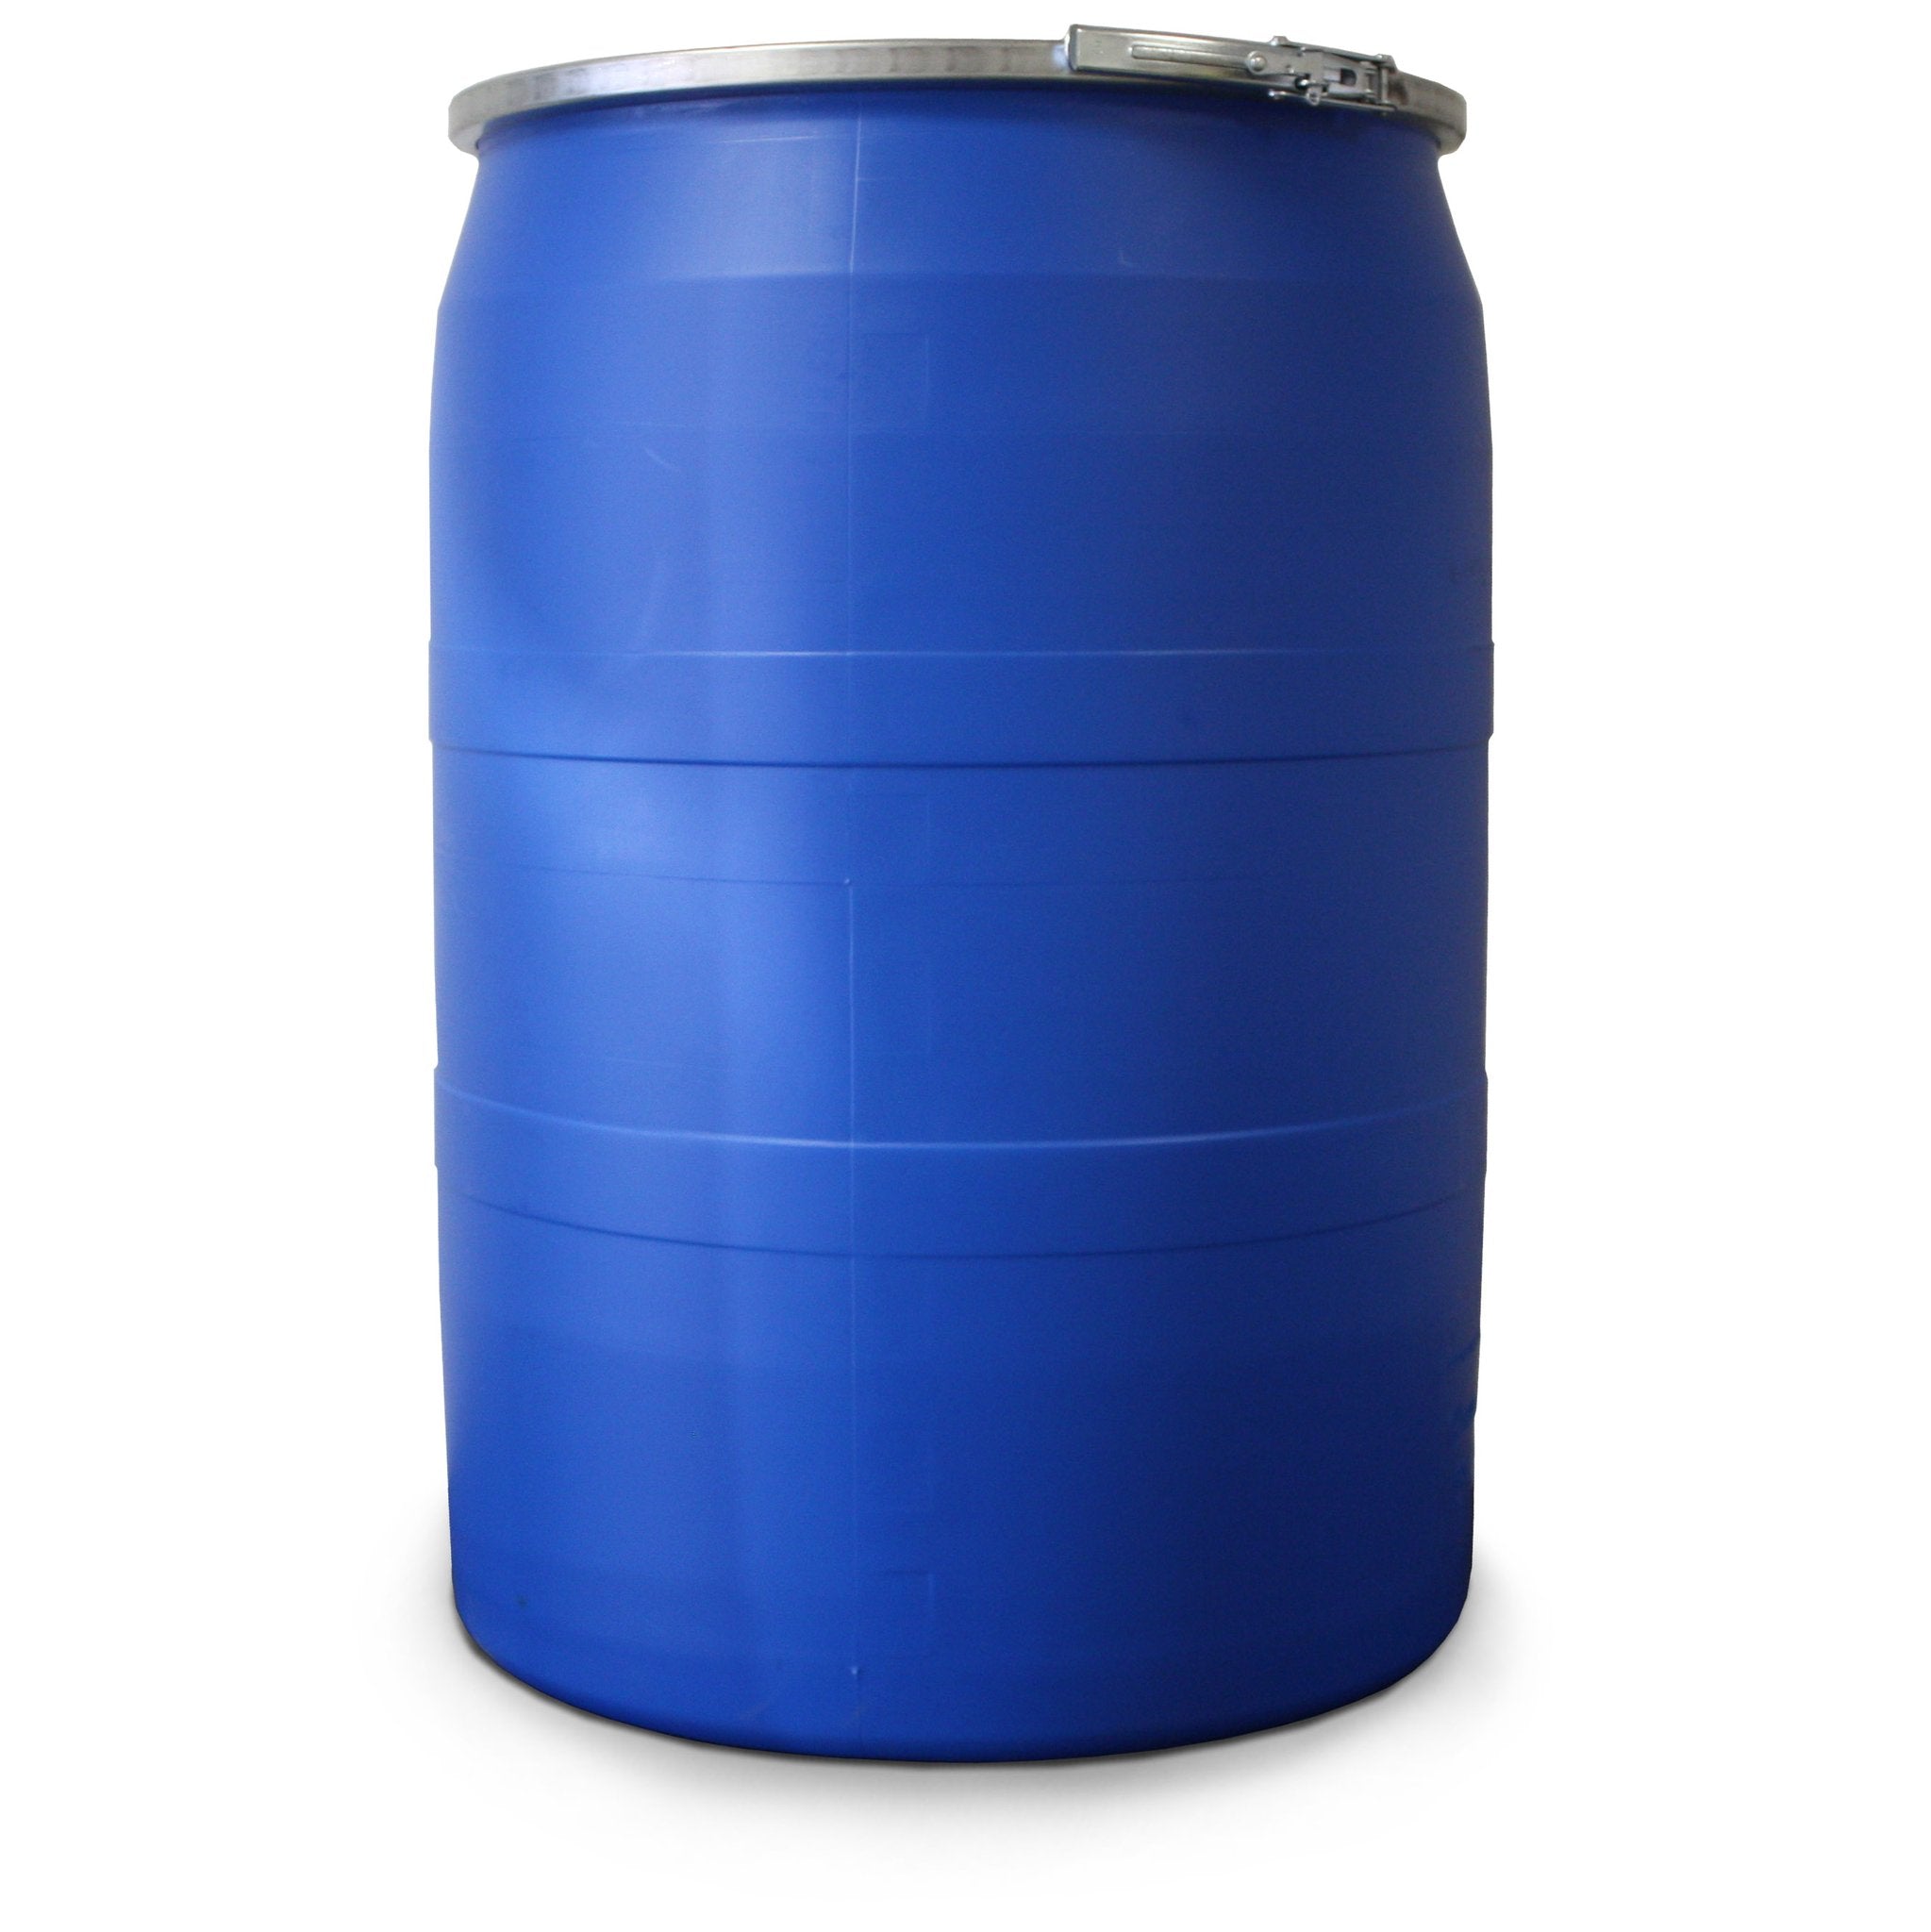 XSORB Outdoor All-Purpose 55 gal Drum - 1 EACH-eSafety Supplies, Inc